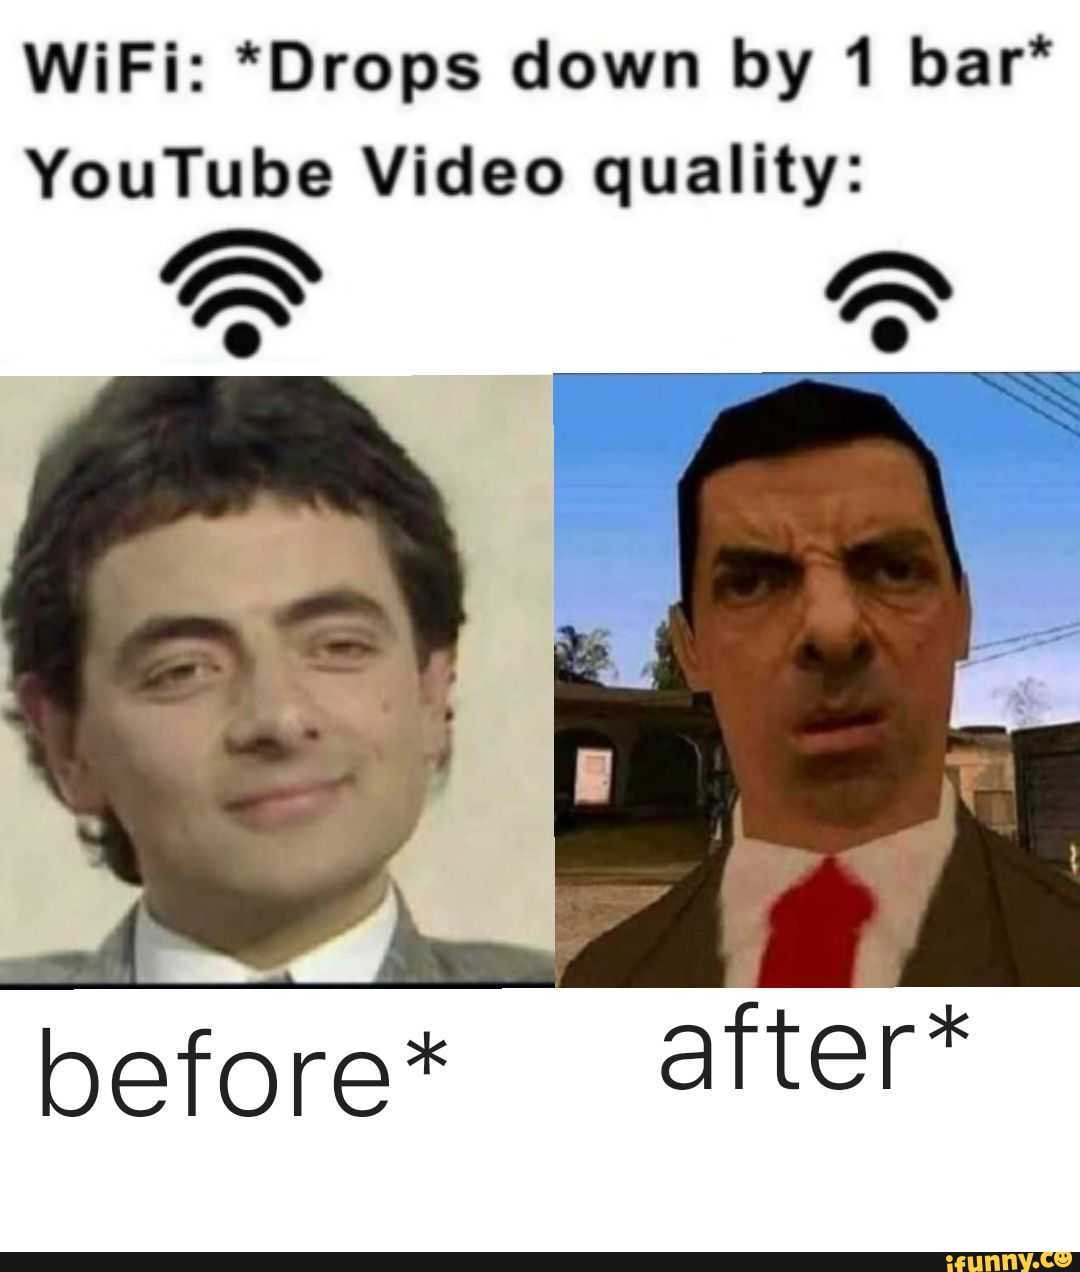 WiFi: *Drops down by 1 bar* YouTube Video quality: before* after* - iFunny